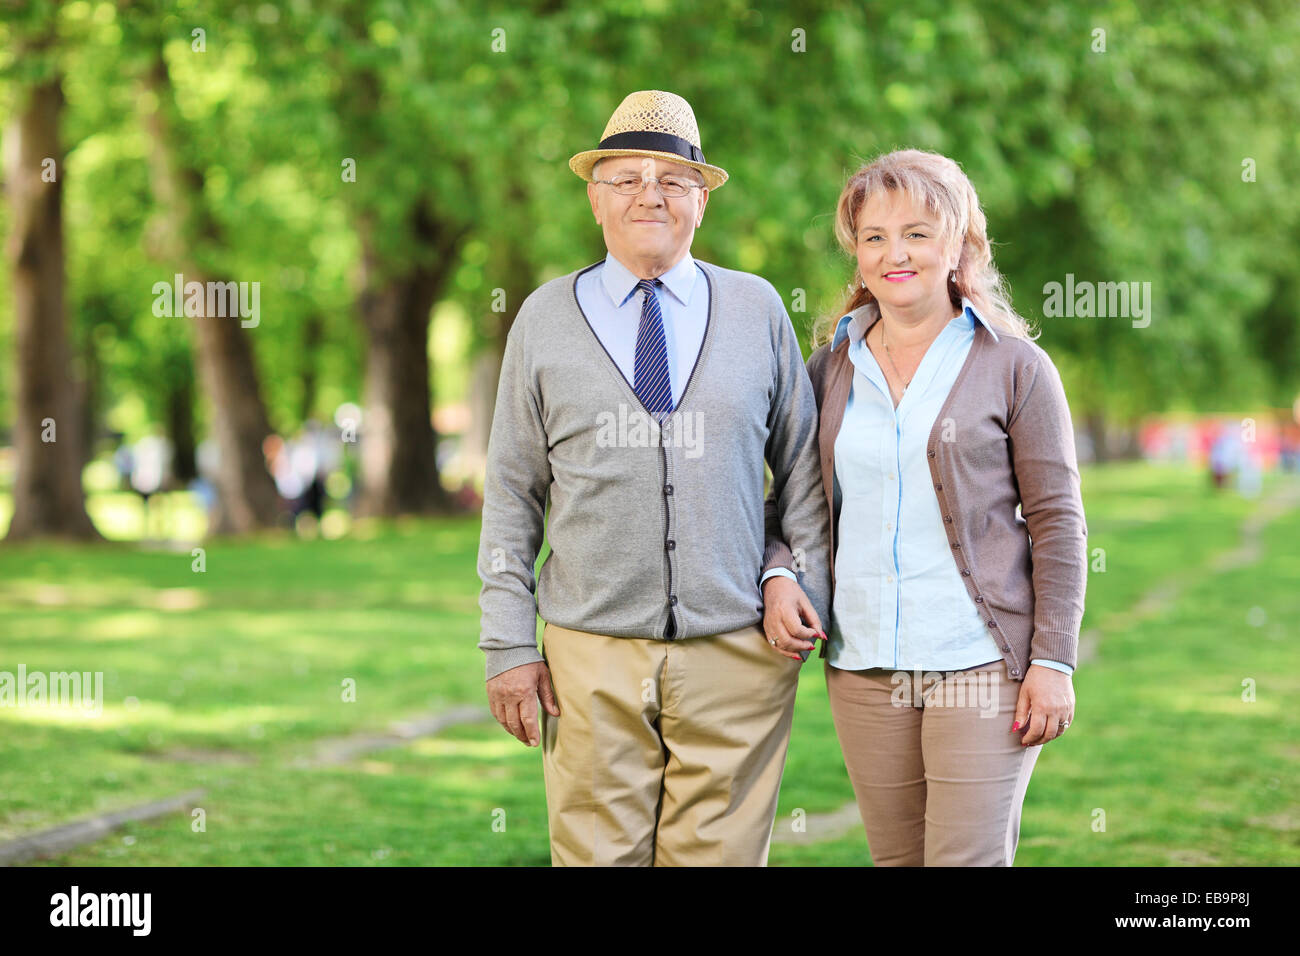 Happy mature couple posing in a park Stock Photo